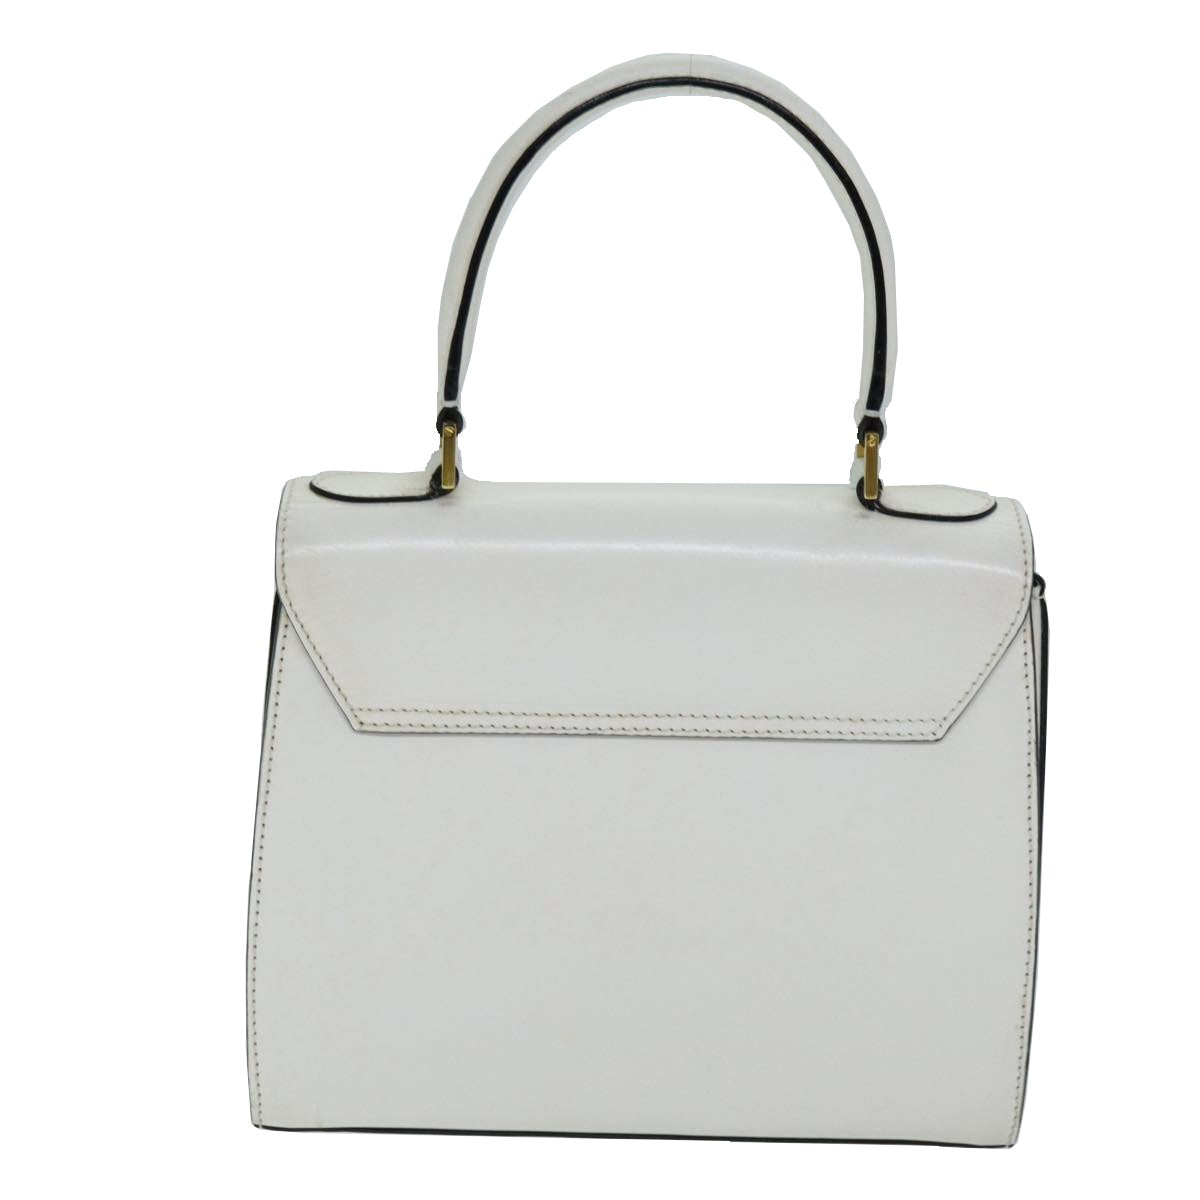 CELINE Hand Bag Leather 2way White Auth 73590